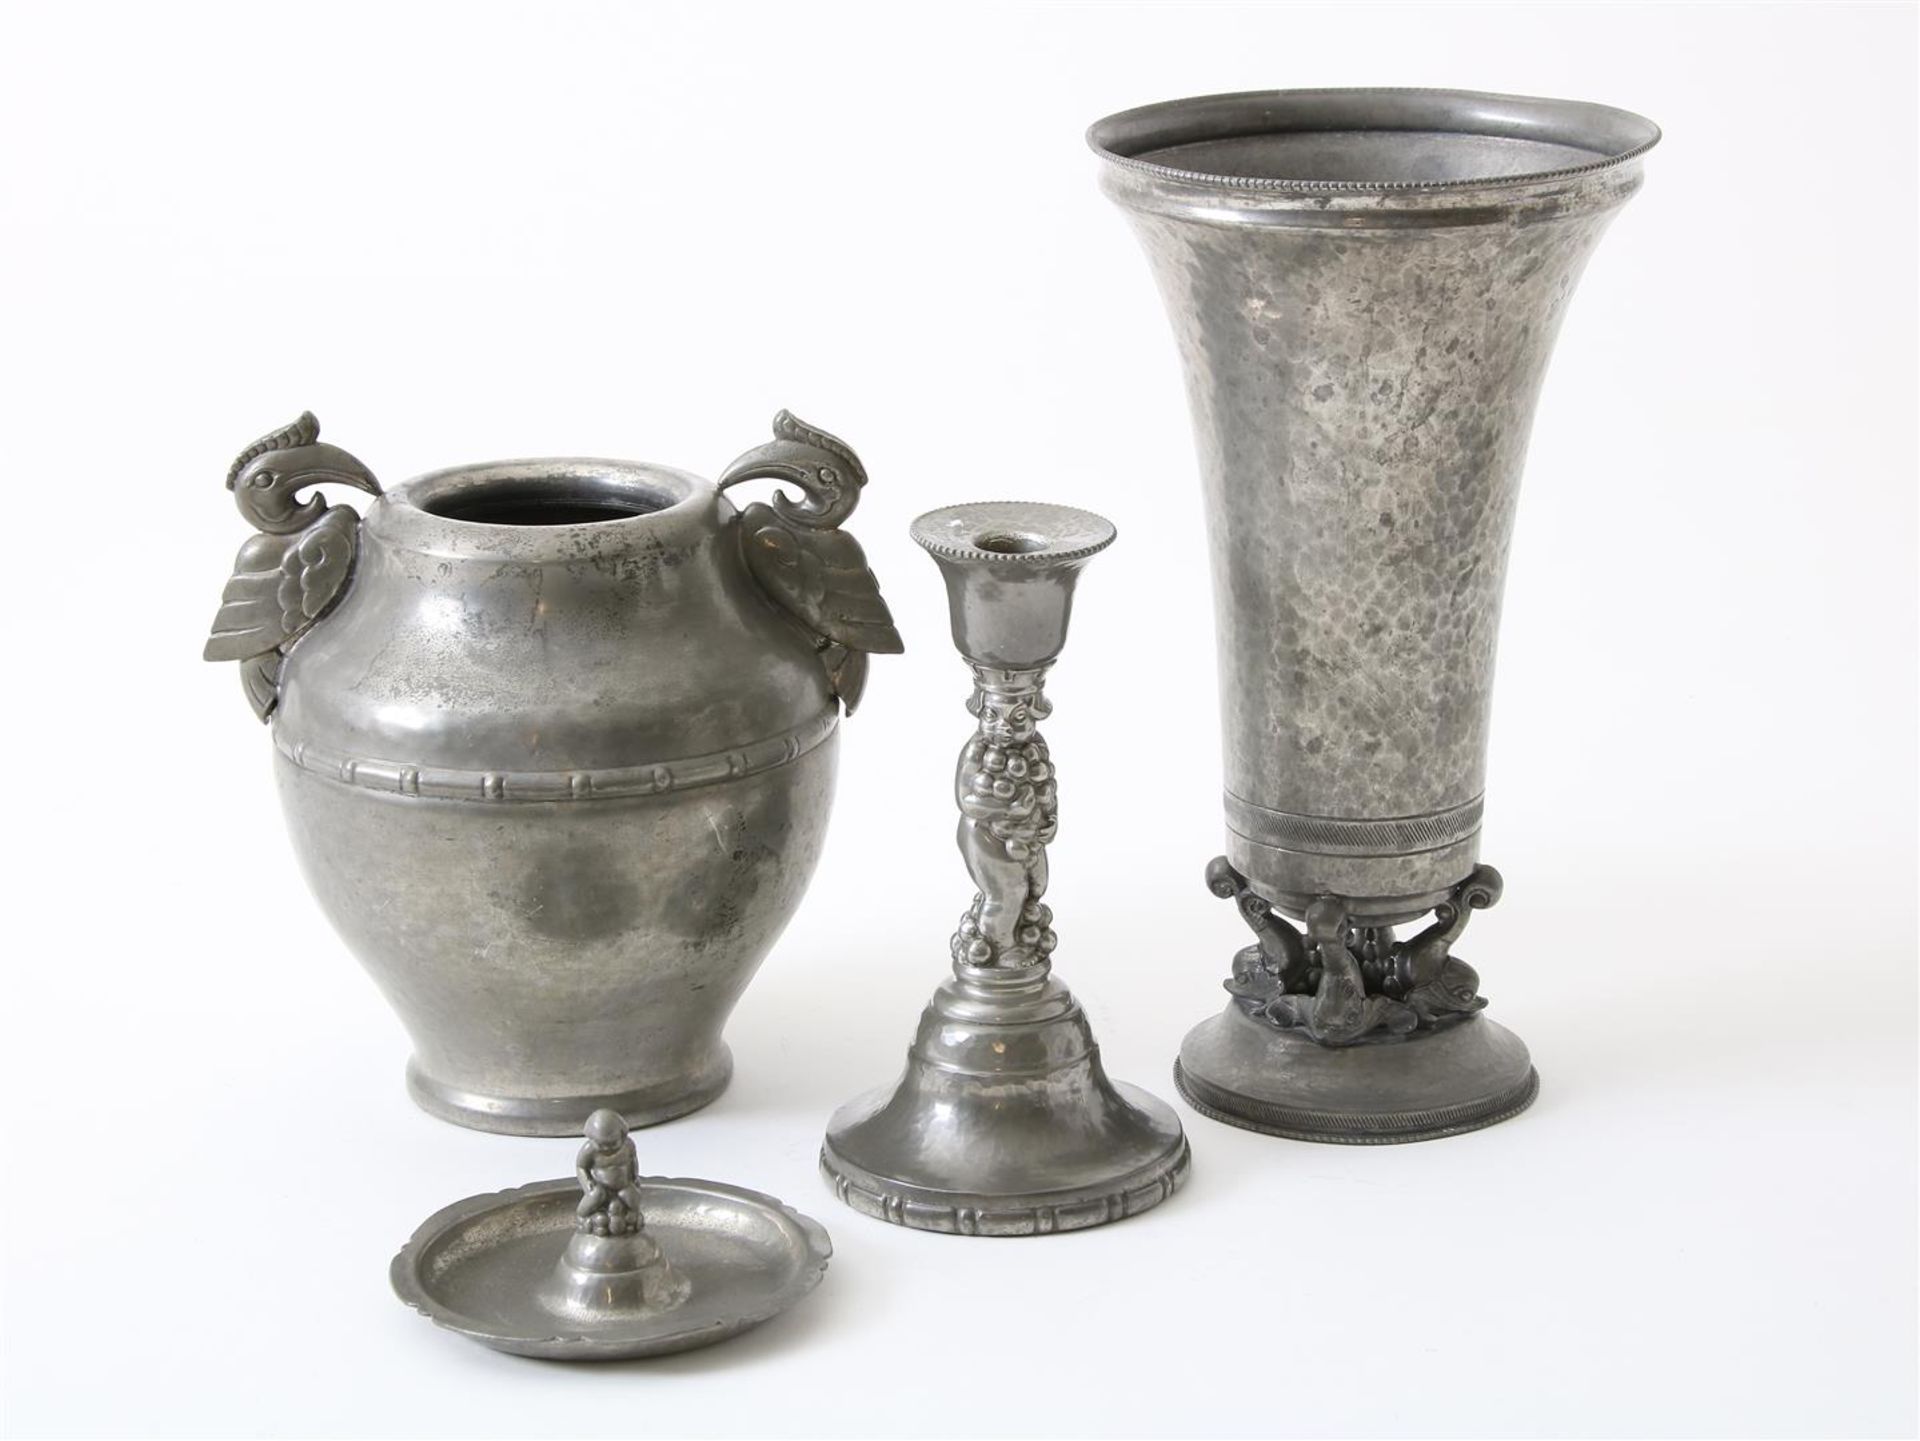 4 pewter objects, George Nilsson